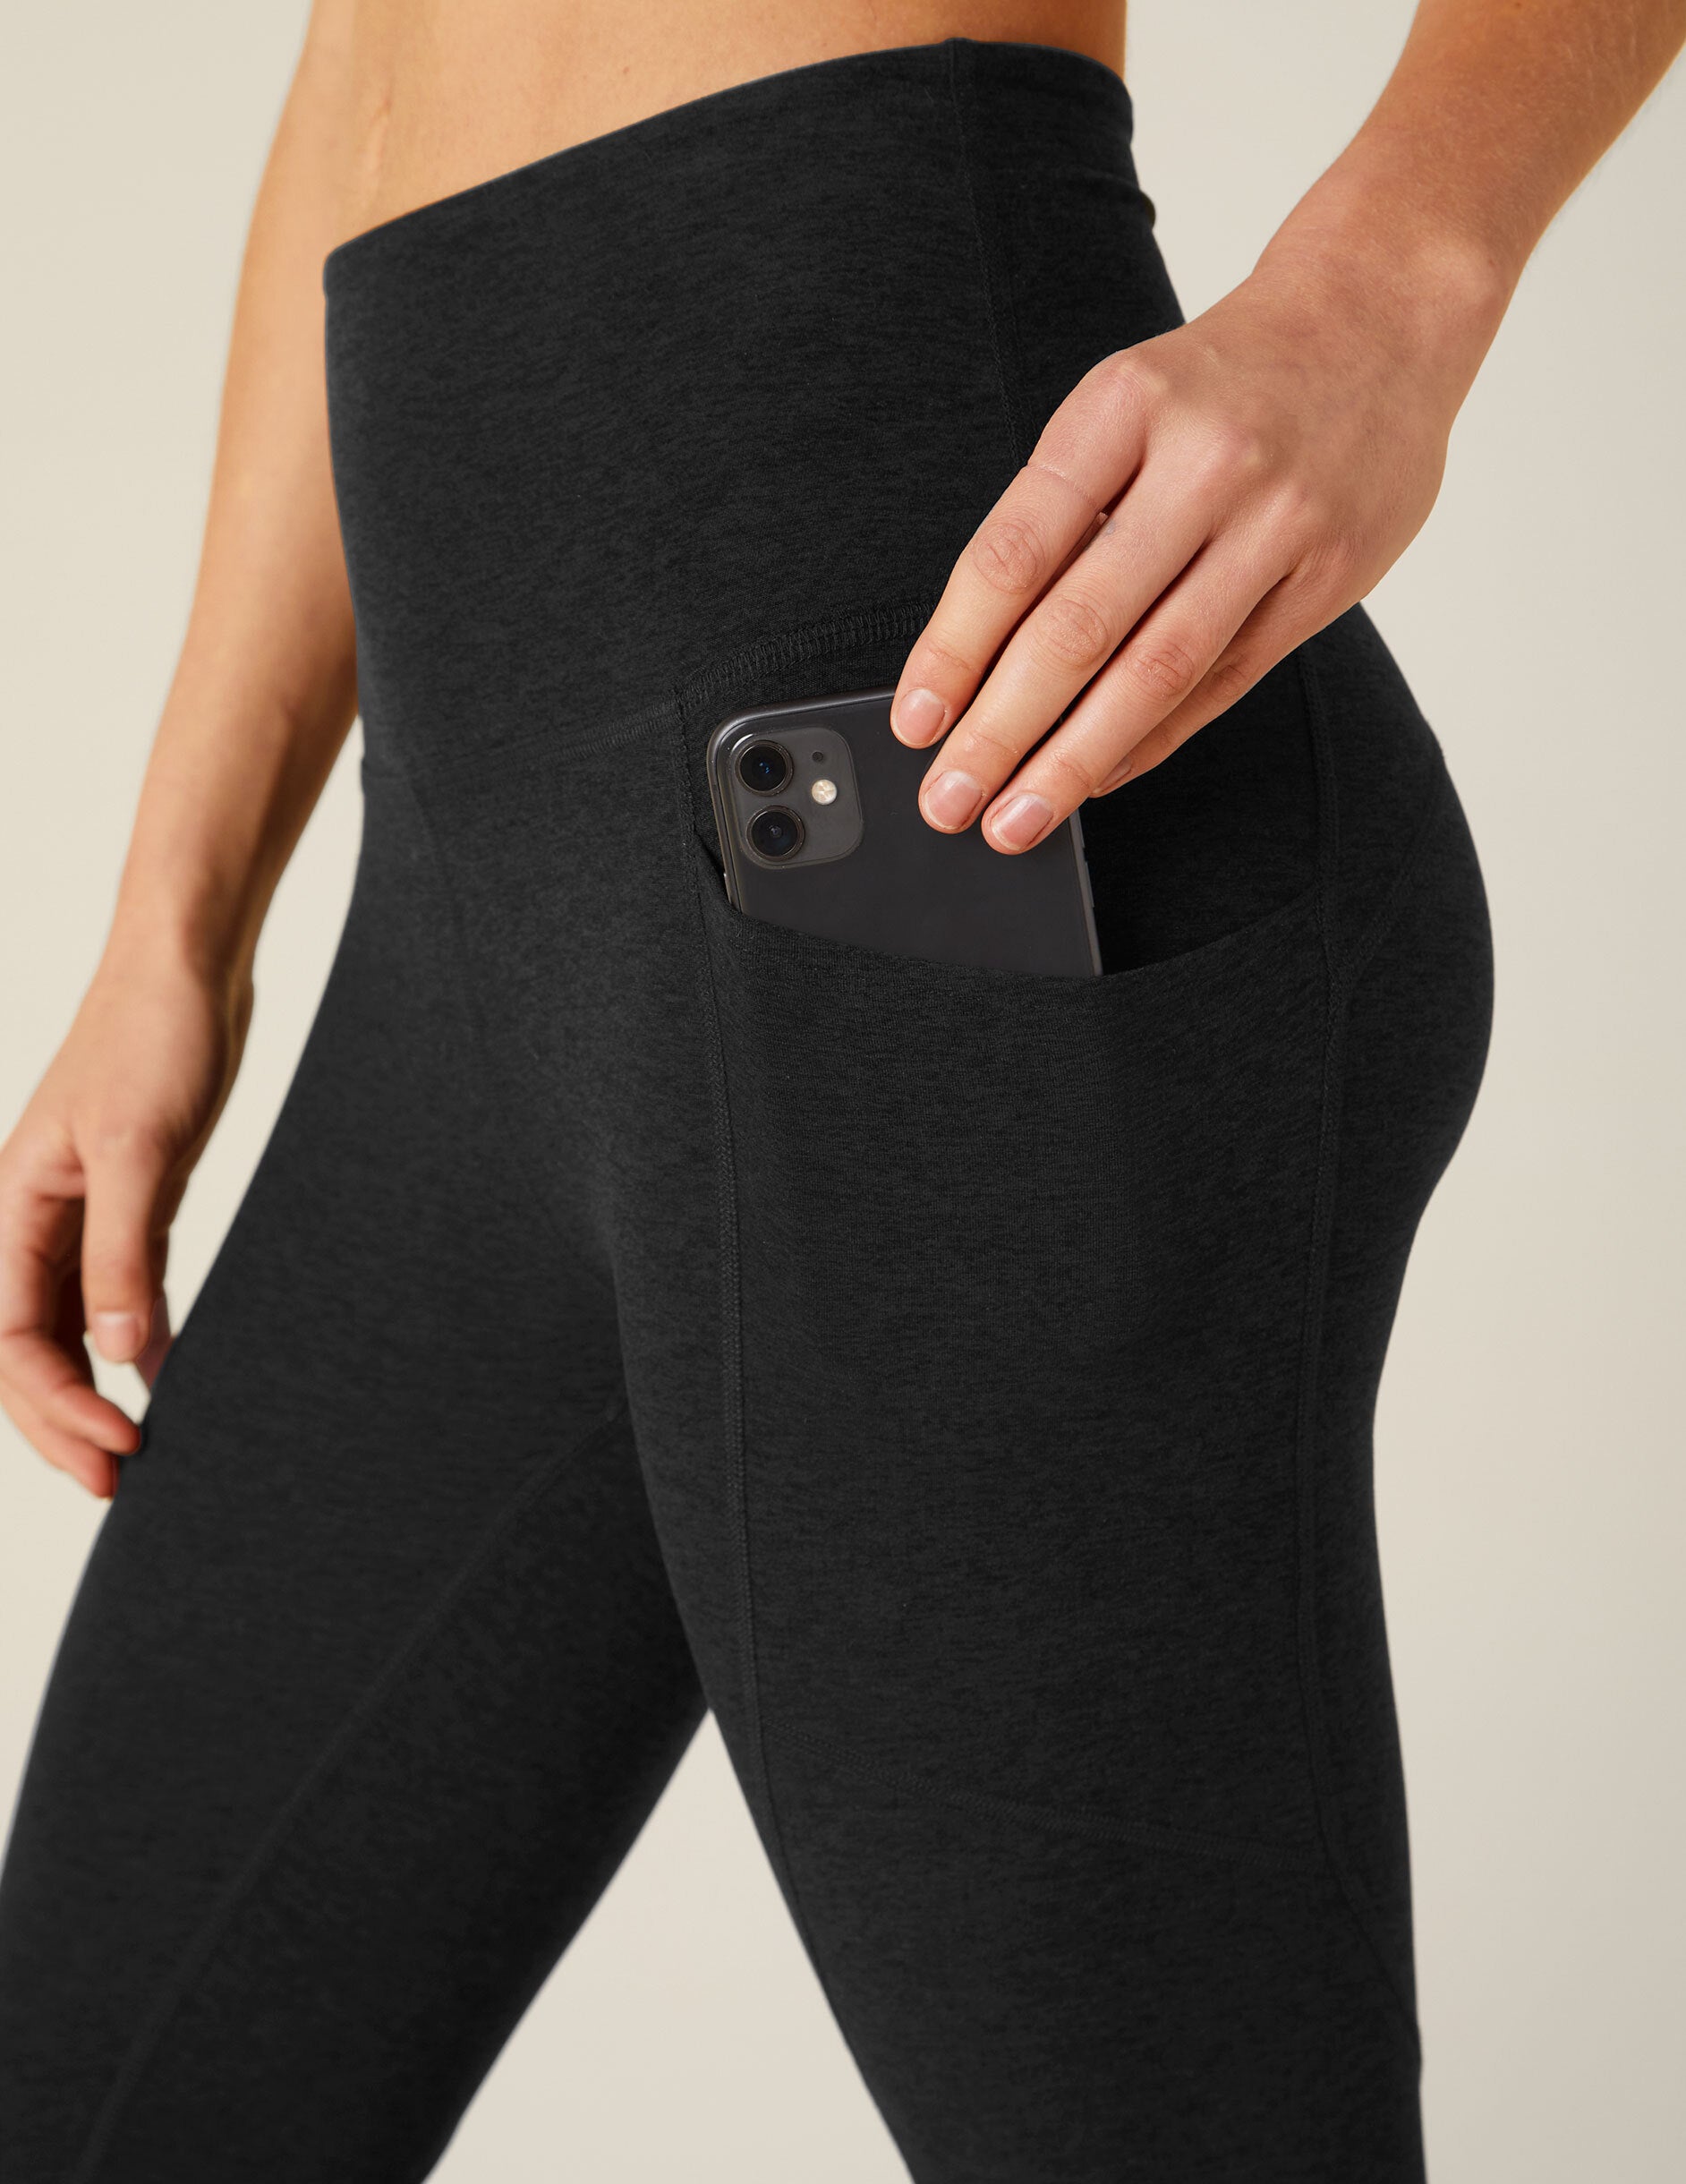 Lululemon's new Align Jogger are a comfy twist on their popular